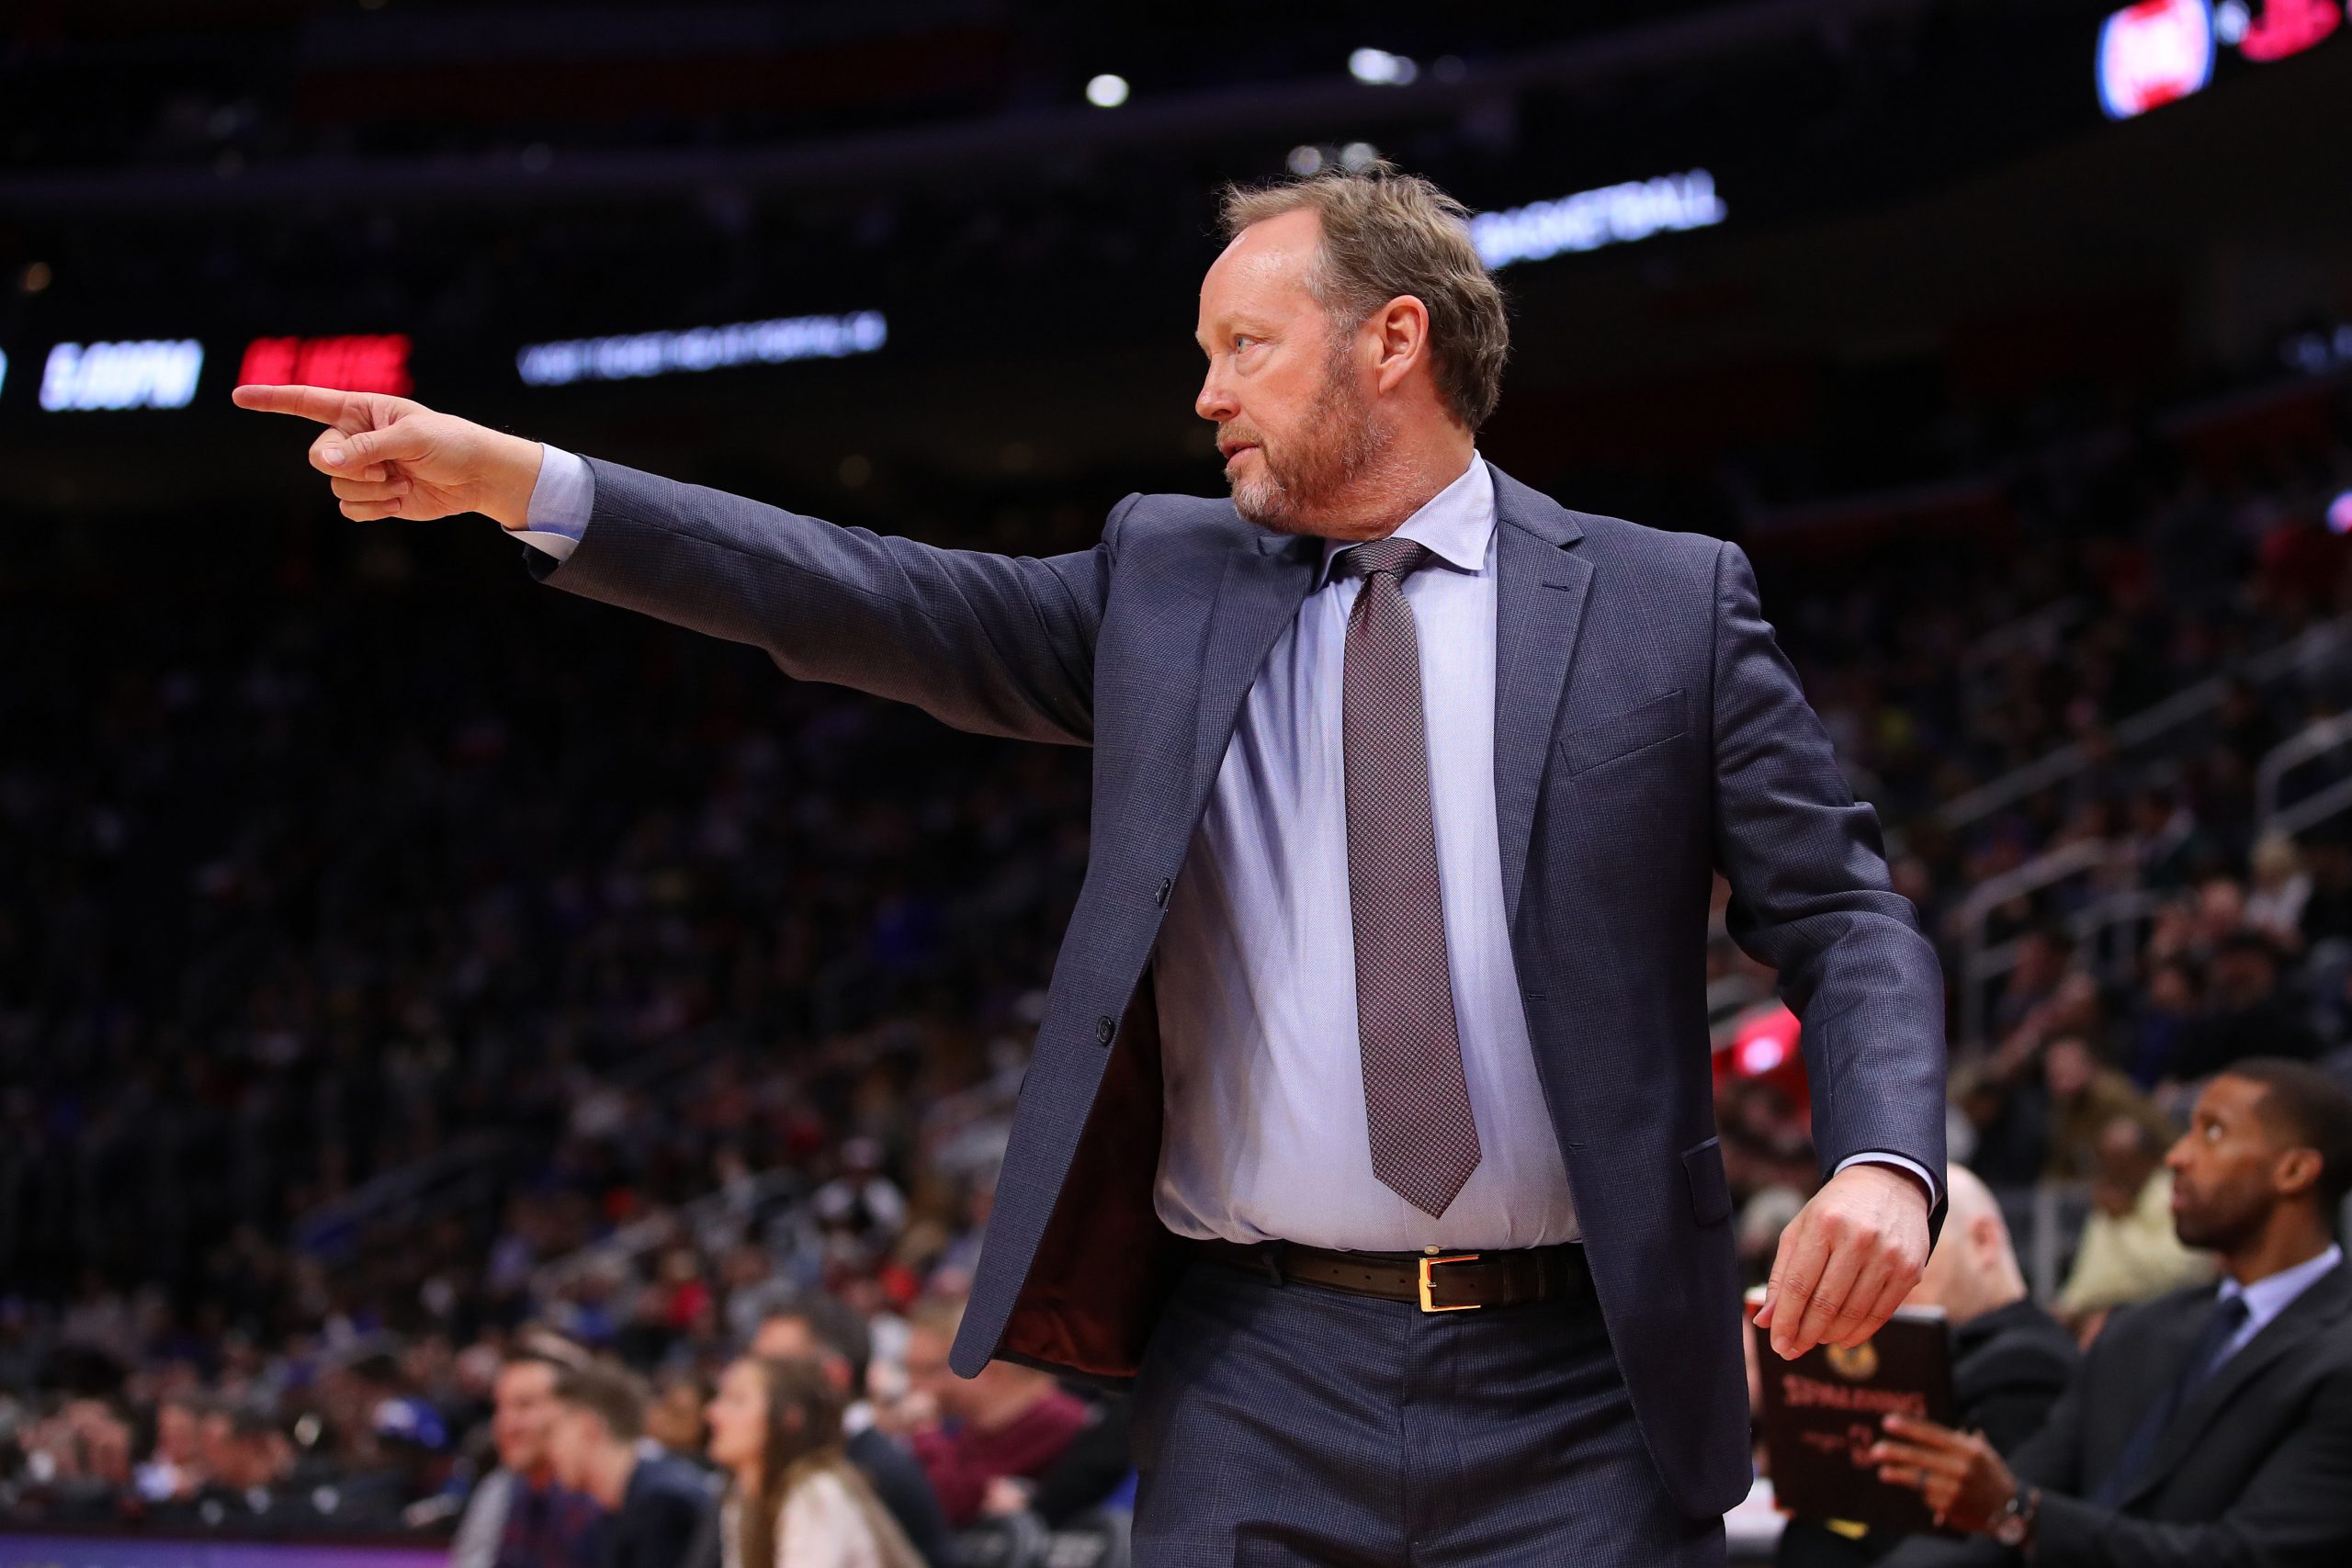 Mike Budenholzer looks disgusted after drinking Dasani, internet brands it ‘poop water’